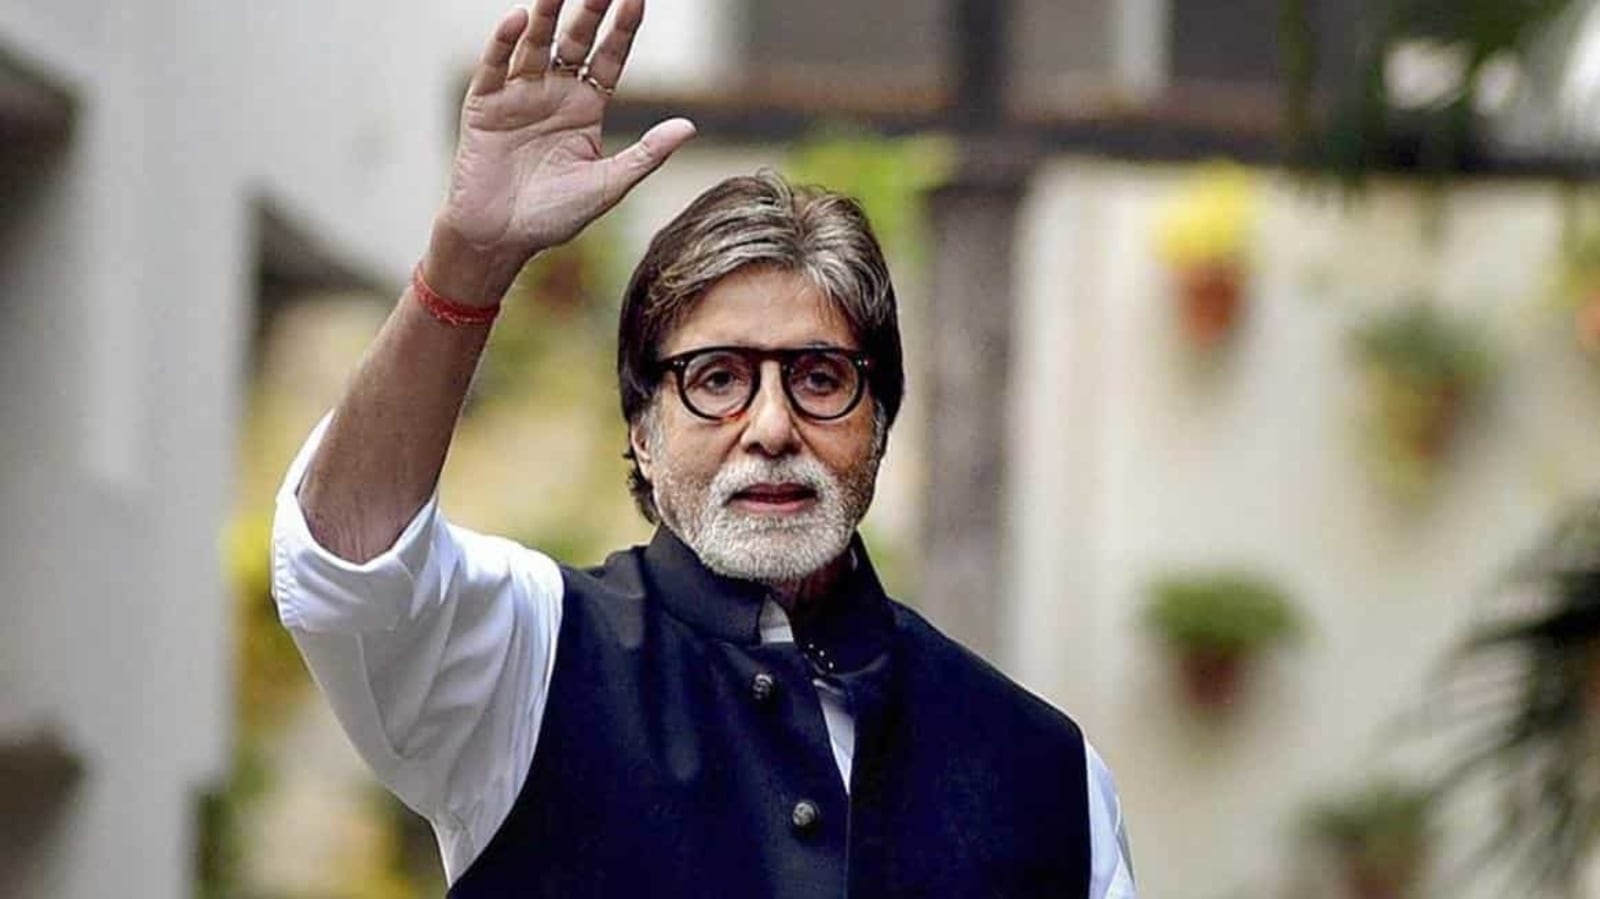 Amitabh Bachchan shuts down 'everyday abuse', lists down all his charitable efforts, says it's 'embarrassing' - Hindustan Times